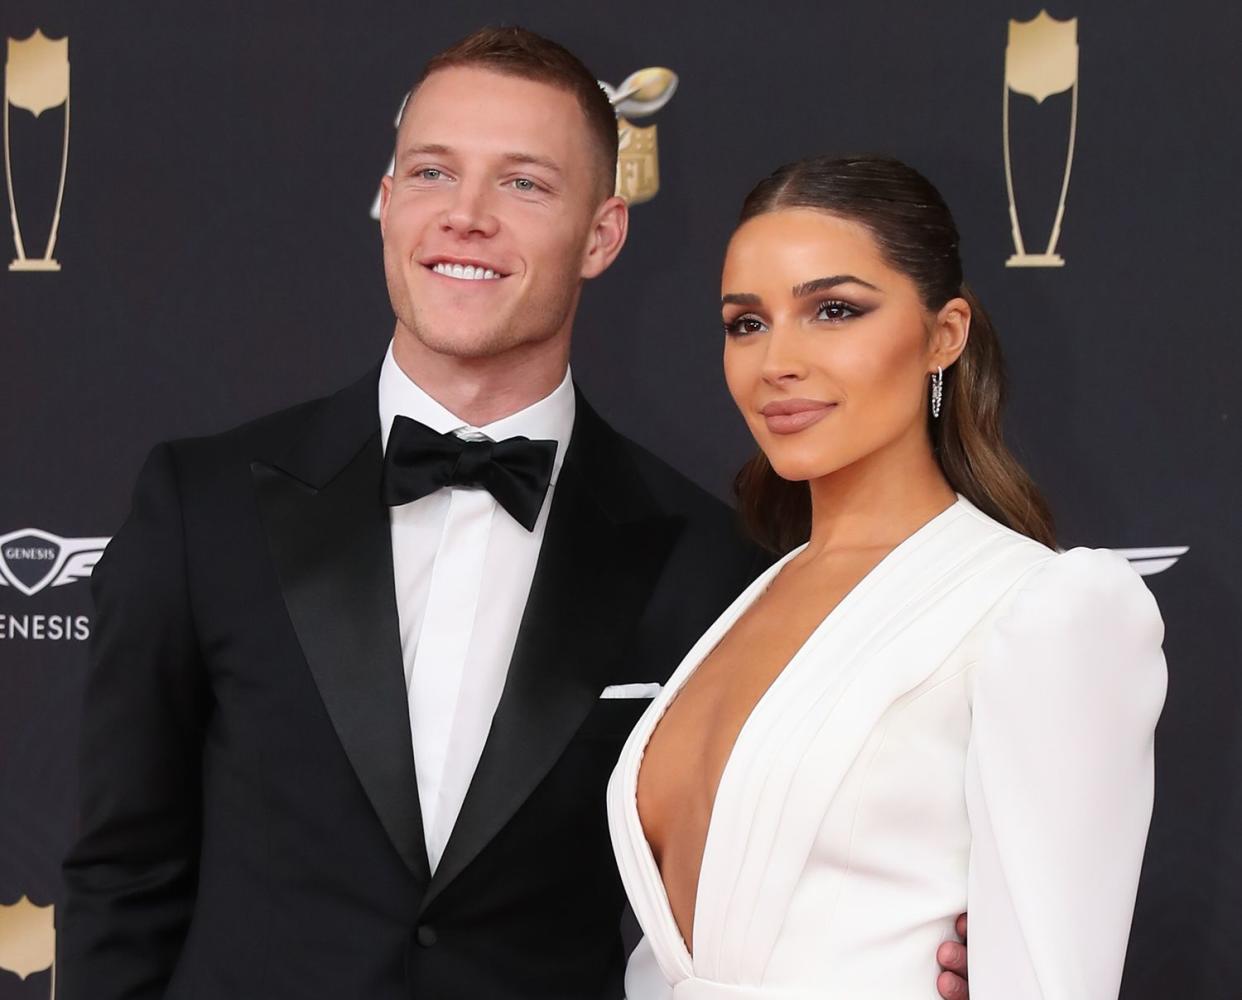 Christian McCaffrey and Olivia Culpo pose on the Red Carpet poses prior to the NFL Honors on February 1, 2020 at the Adrienne Arsht Center in Miami, FL